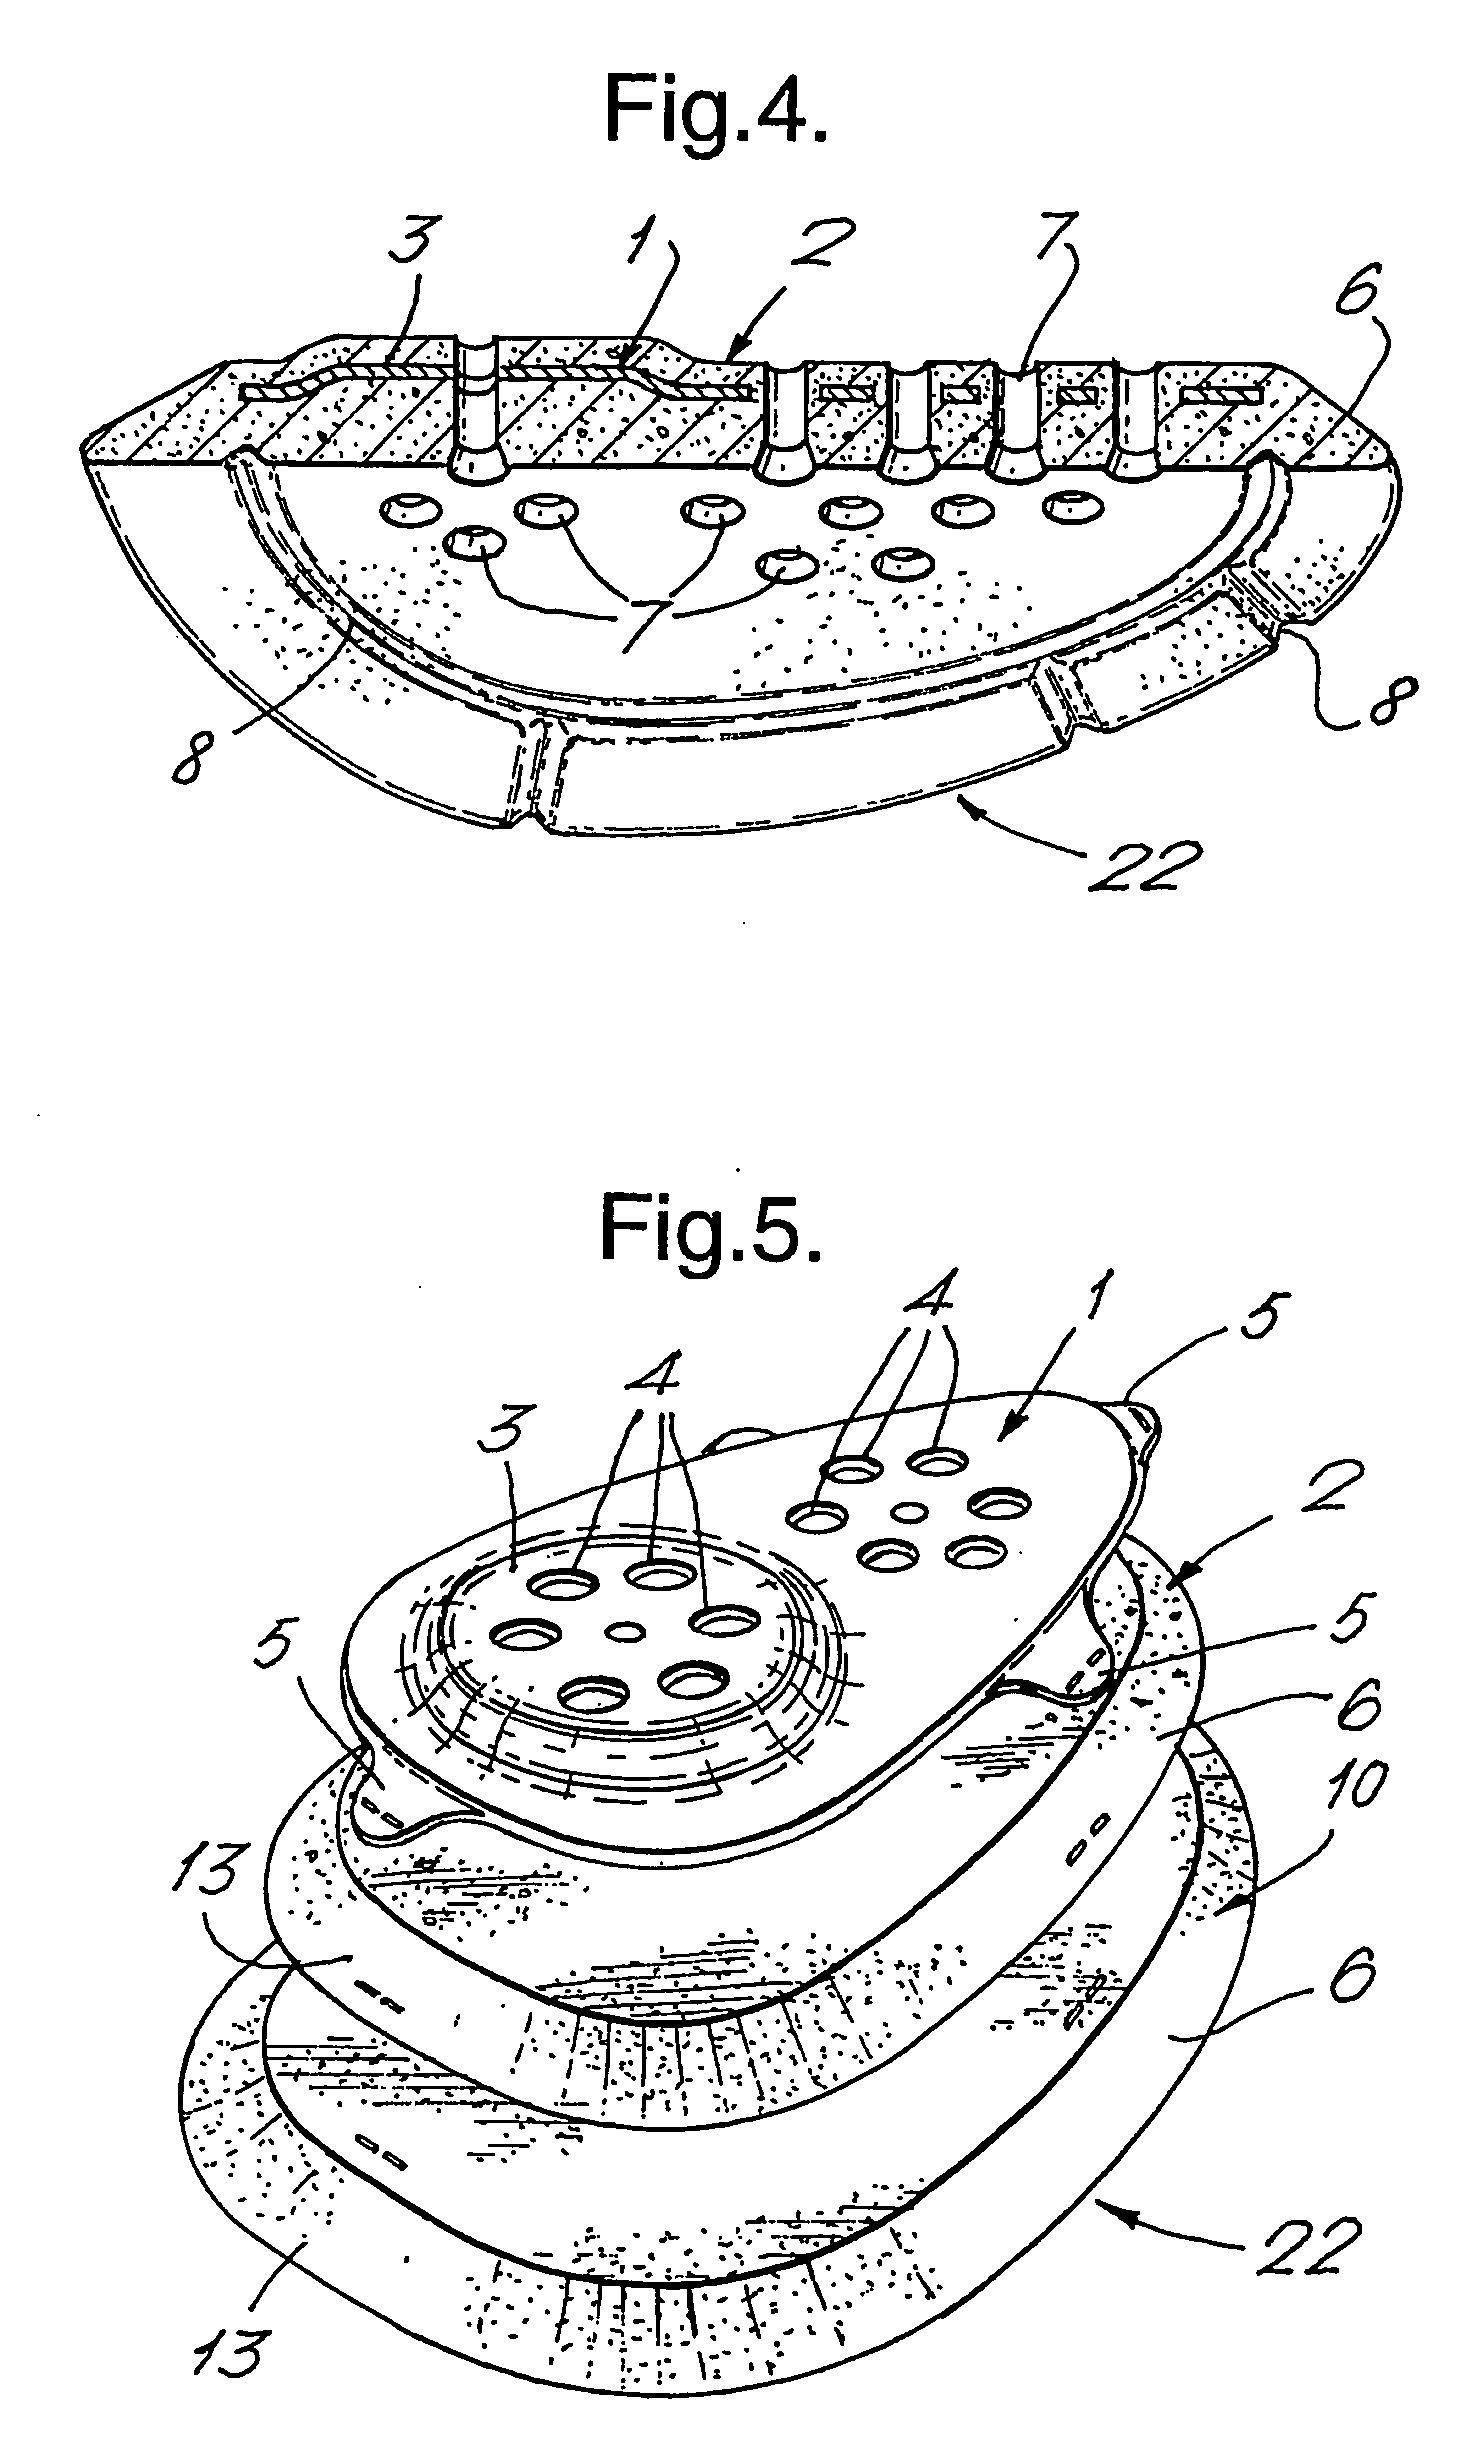 Proection pad for the trochantheric region and device comprising the pad